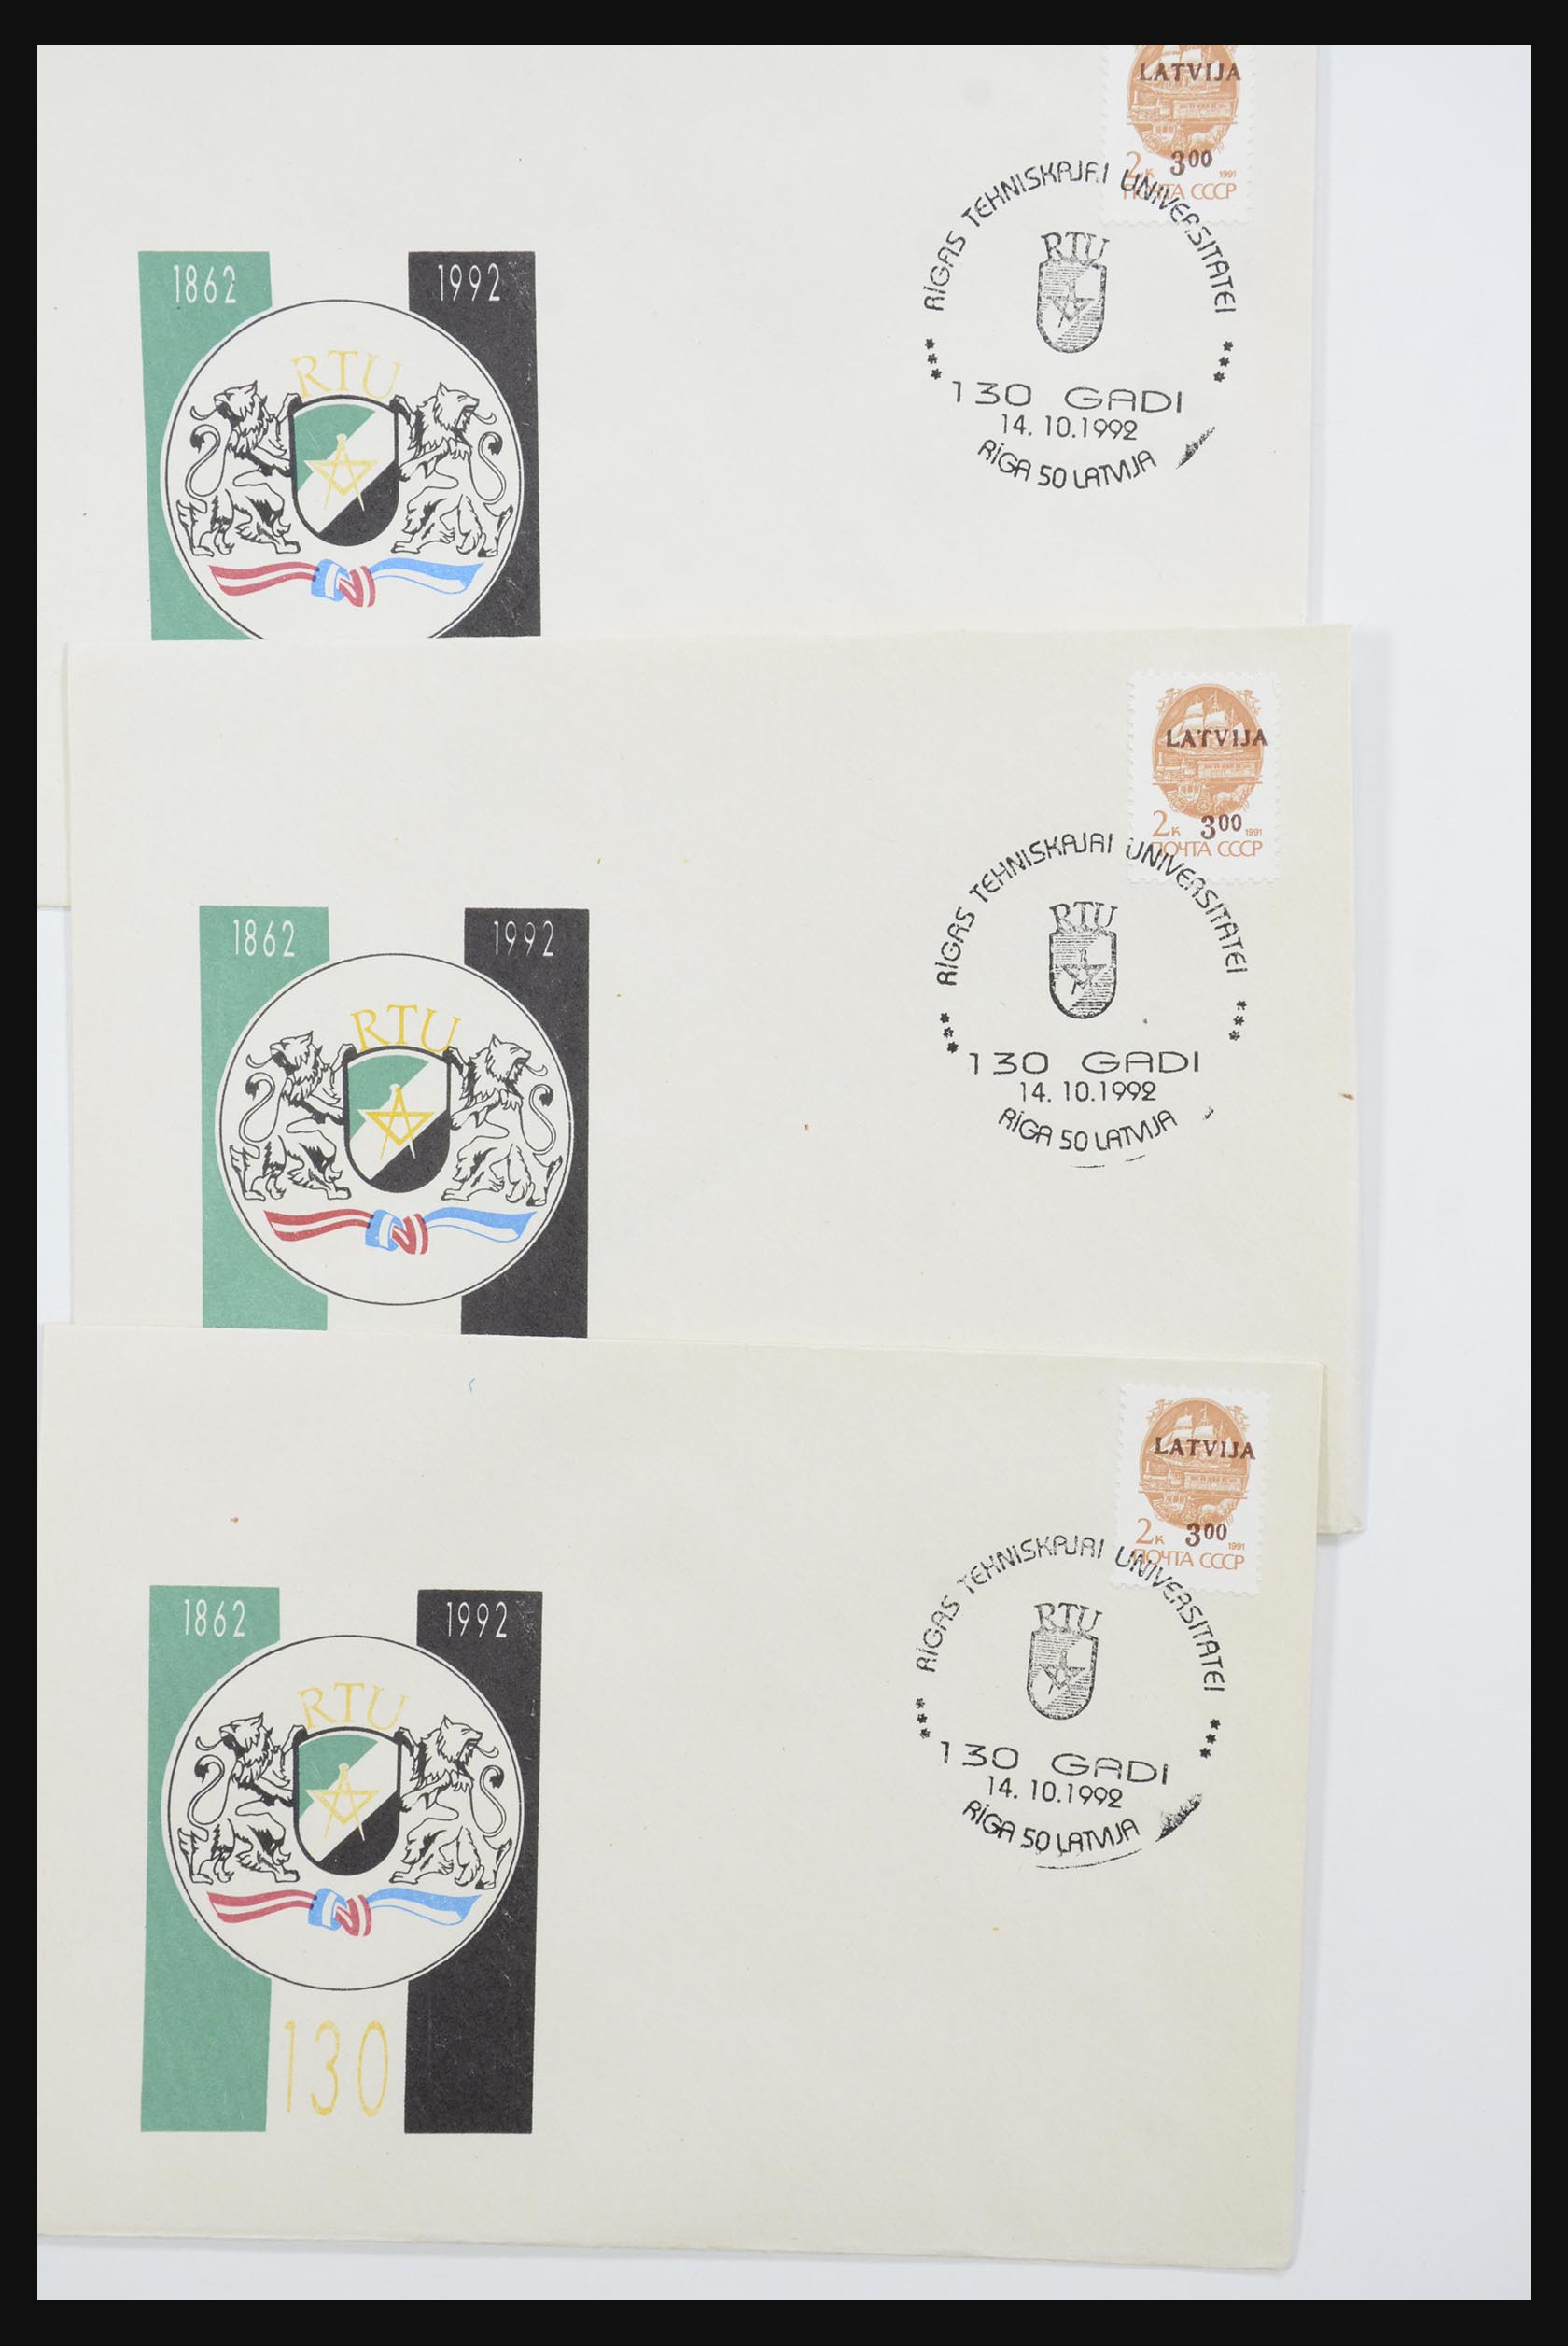 31584 631 - 31584 Latvia covers/FDC's and postal stationeries 1990-1992.